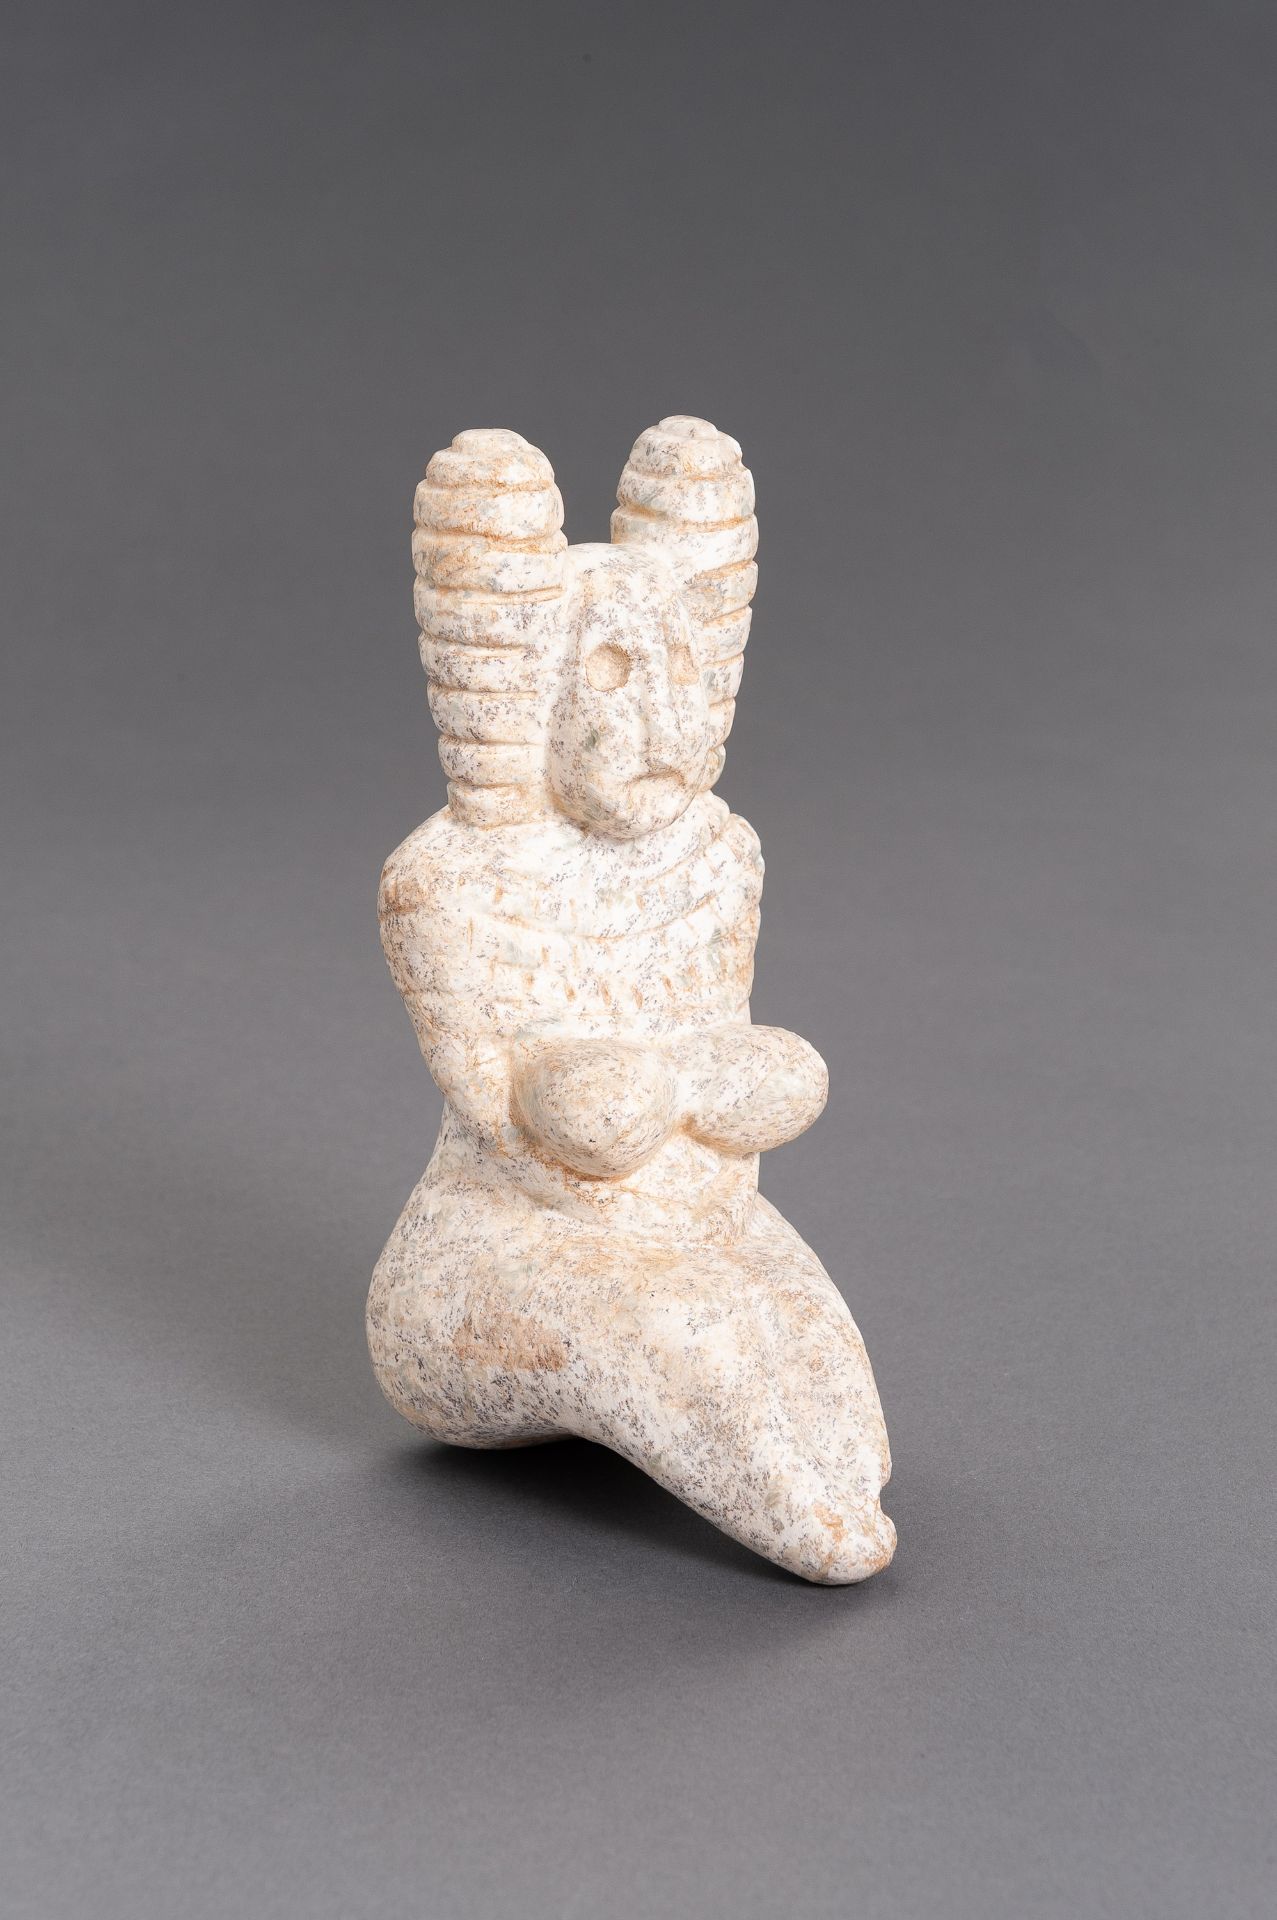 A STONE INDUS VALLEY STYLE FIGURE OF A FERTILITY GODDESS - Image 3 of 9